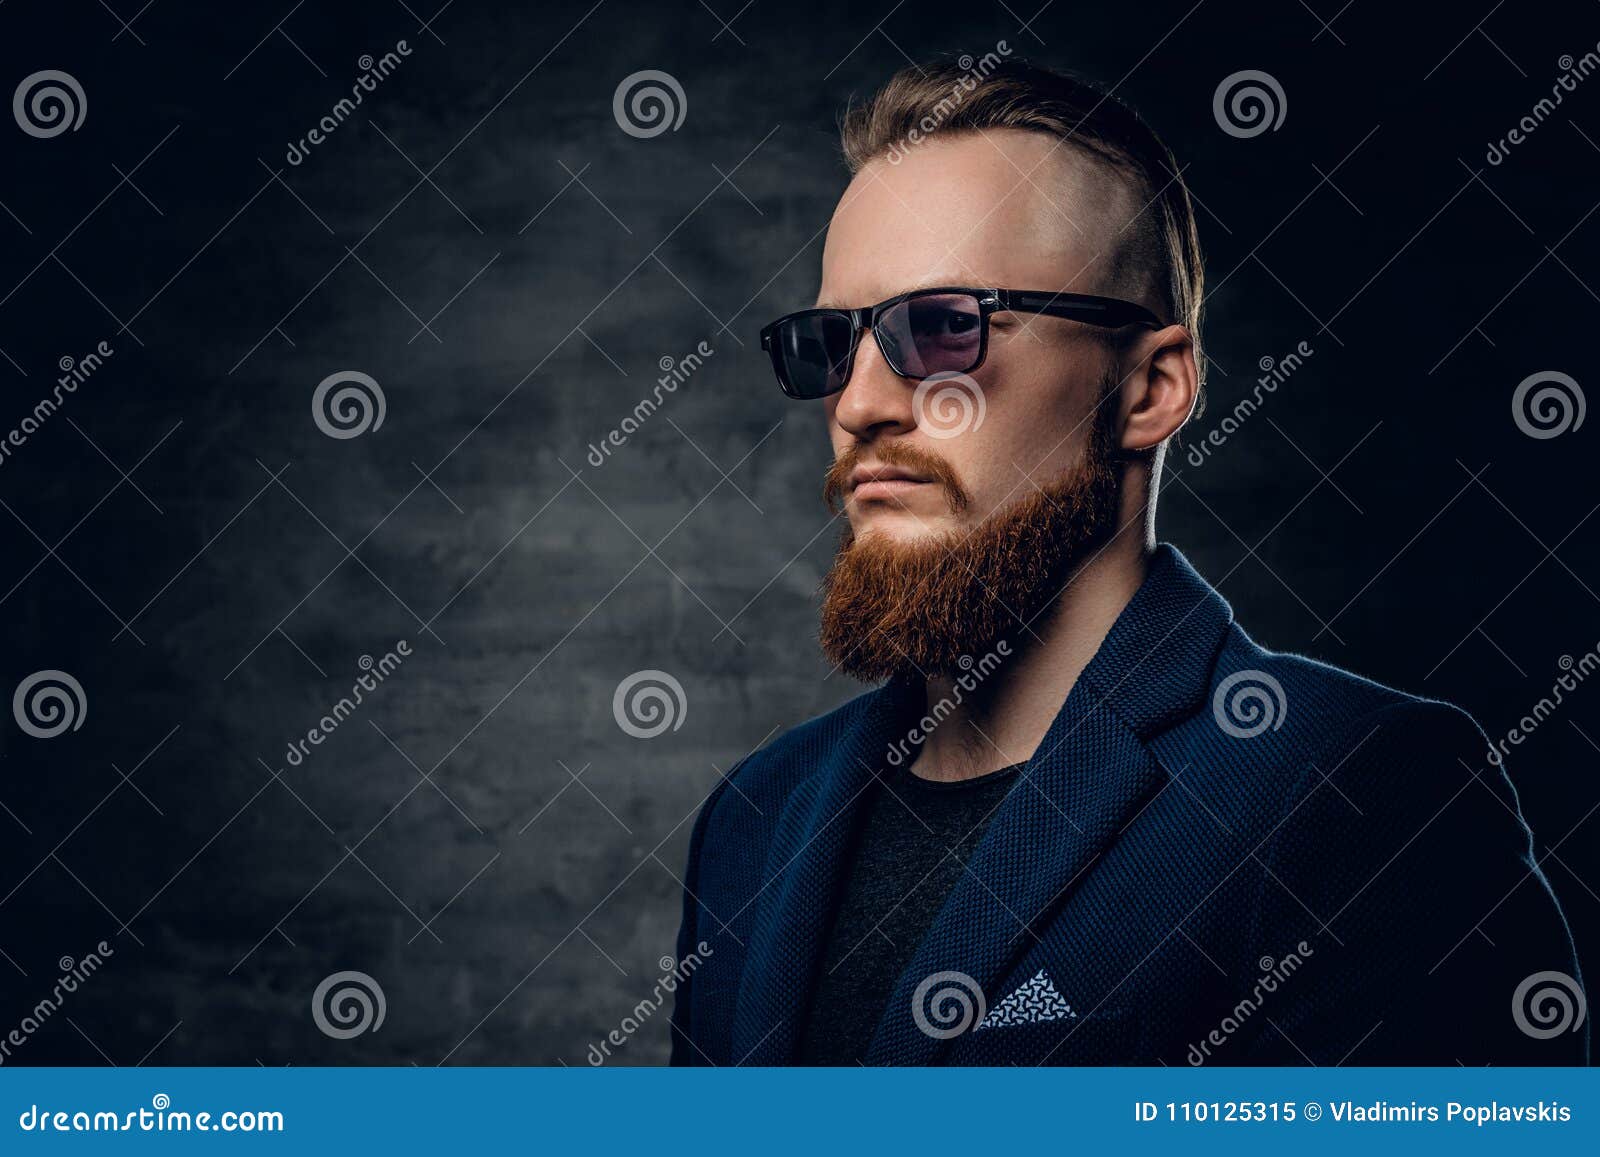 Redhead Male Dressed in a Blue Suit and Sunglasses. Stock Image - Image ...